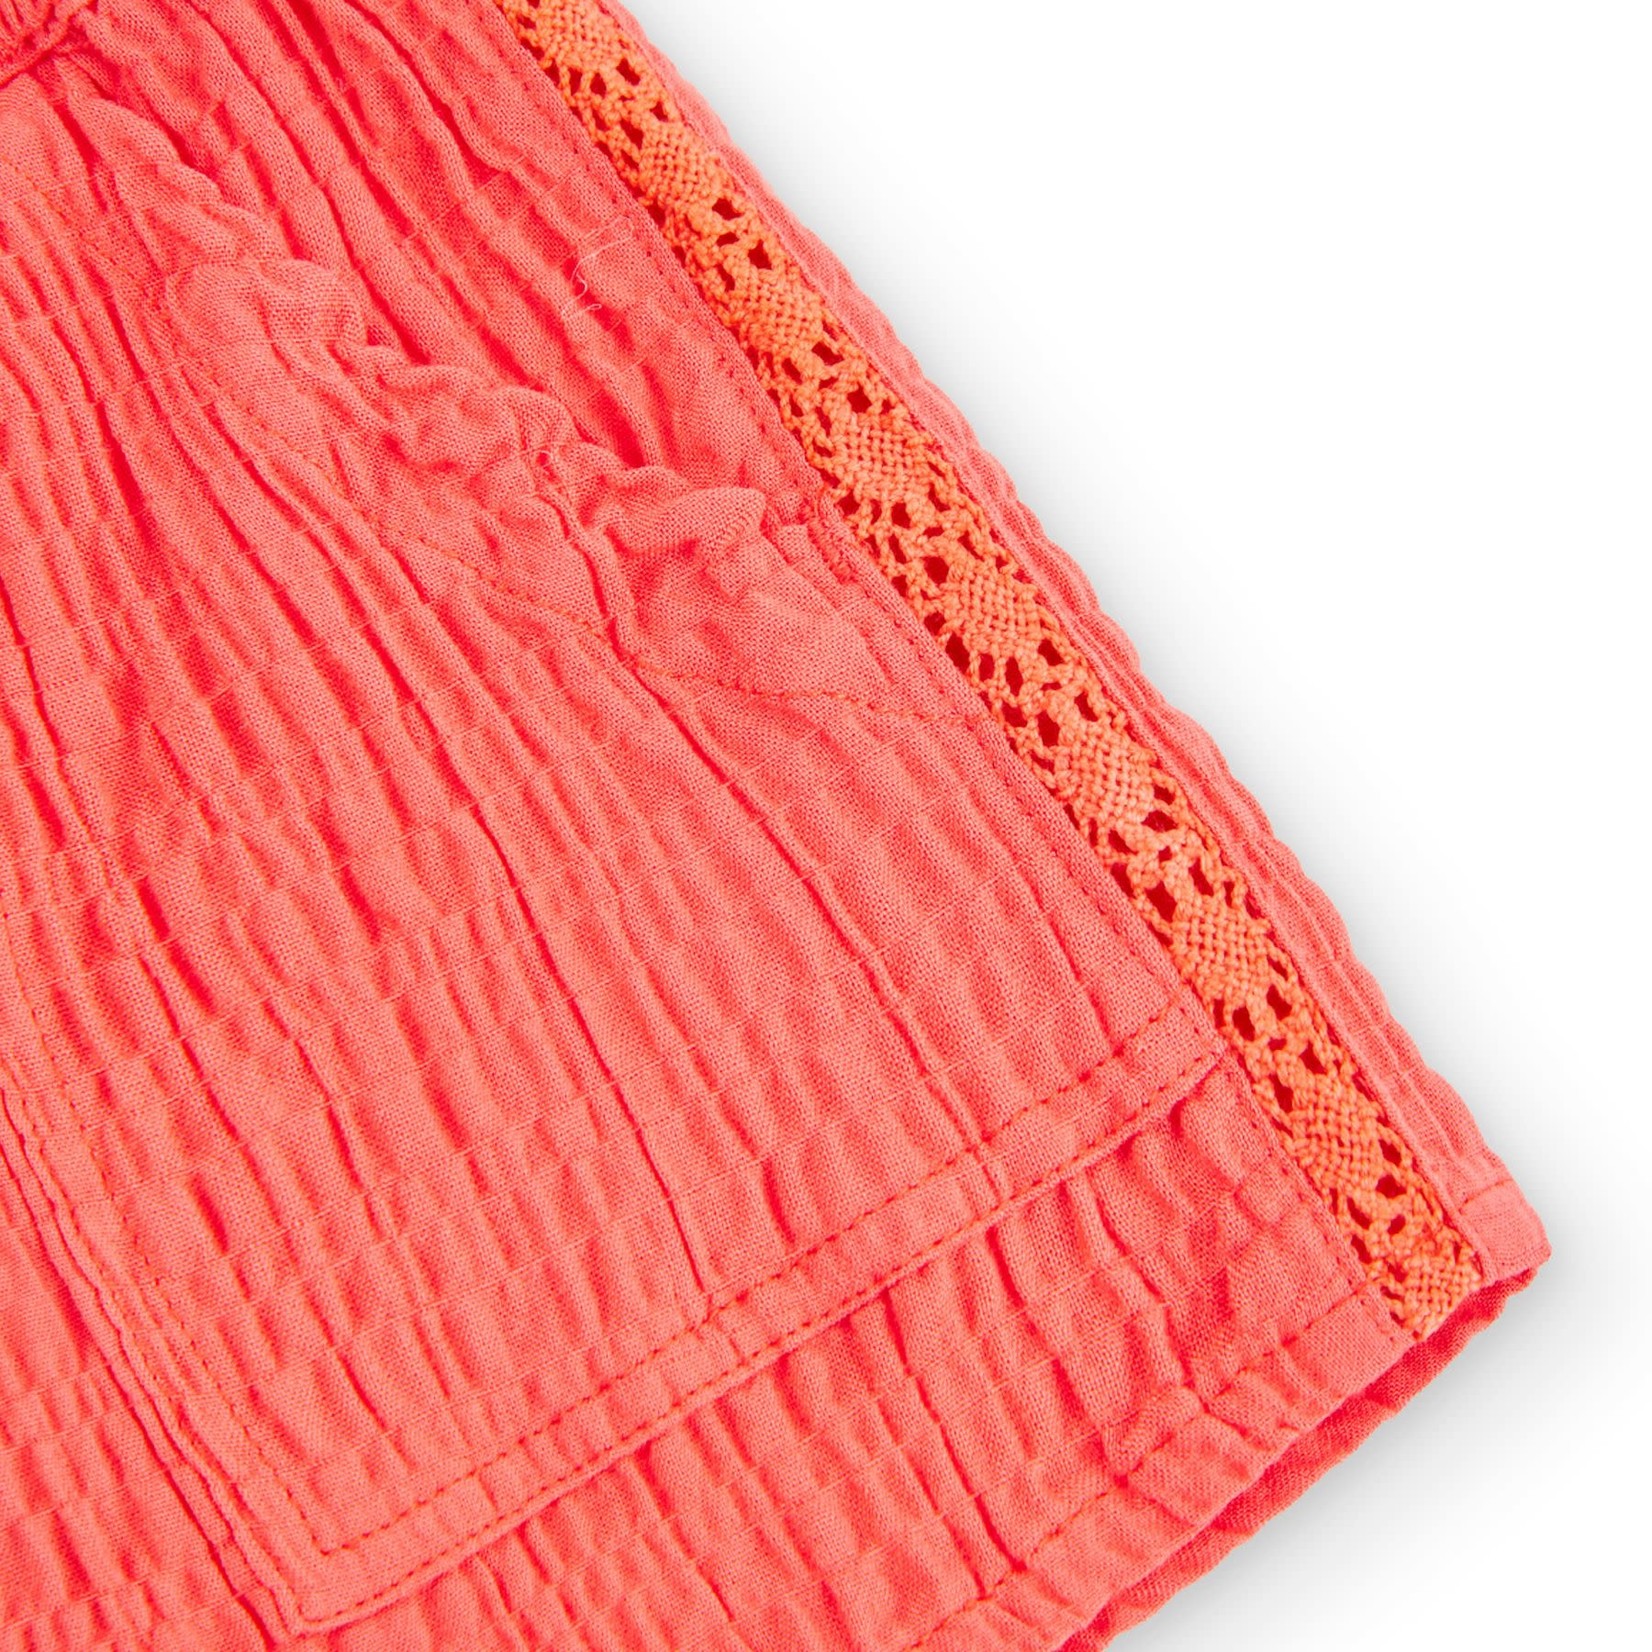 Boboli BOBOLI - Bright coral shorts with wooden buttons at front and embroidery on sides